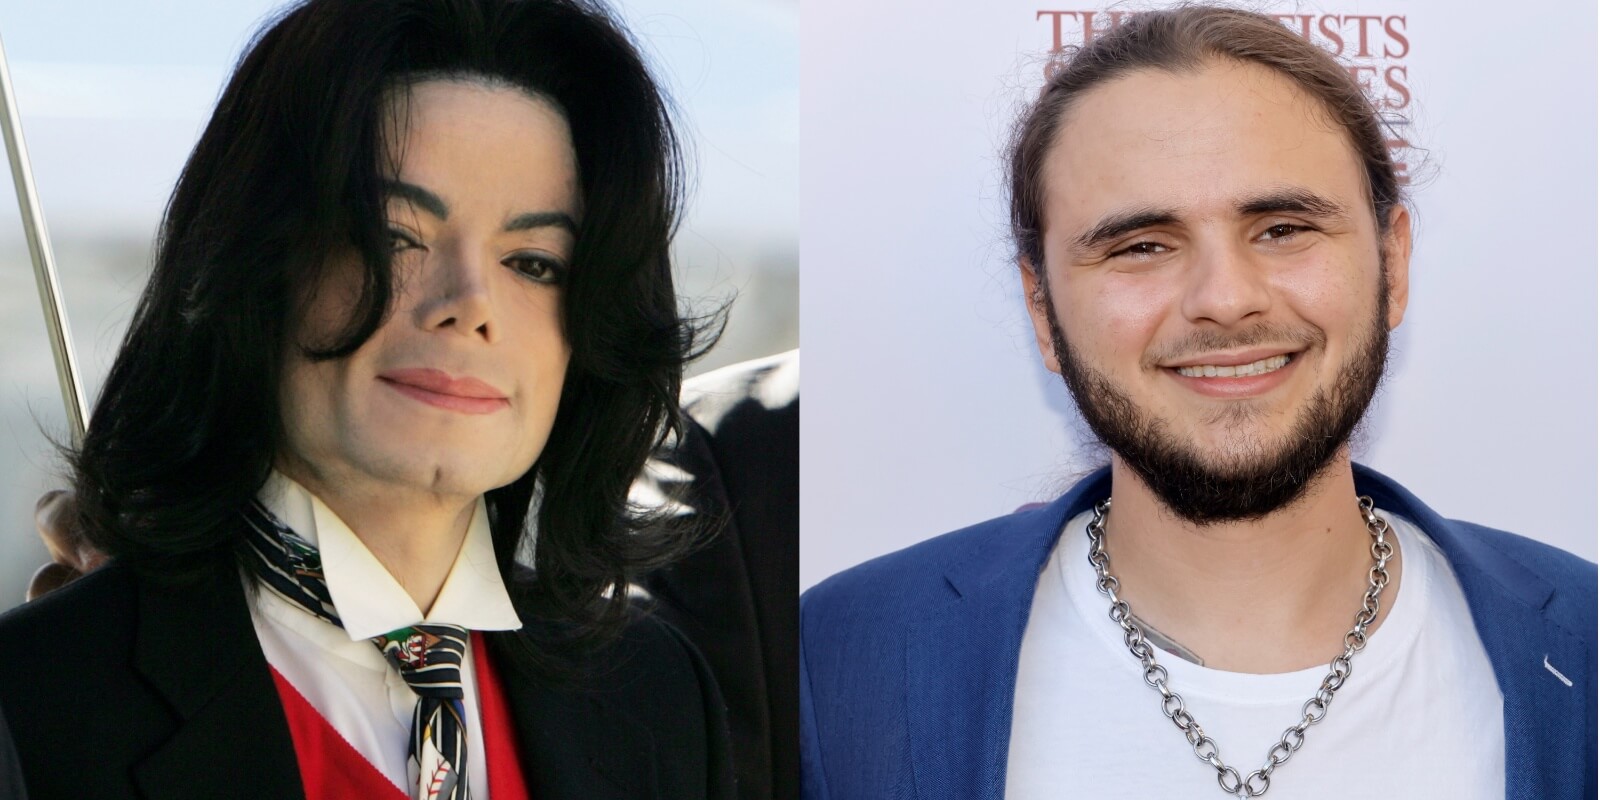 Michael Jackson and his son Prince Jackson in side-by-side photographs.